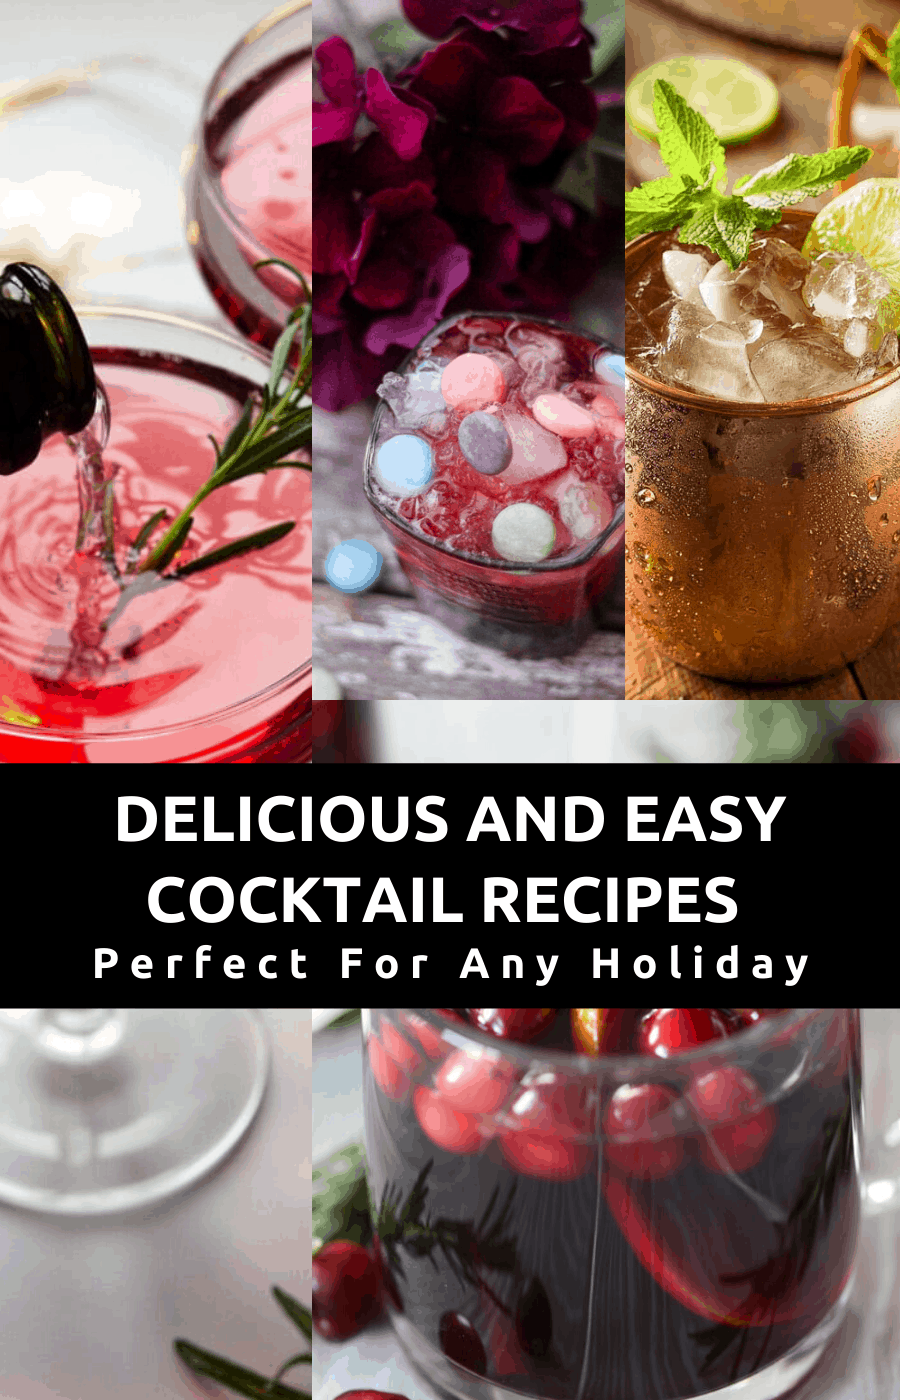 Delicious and easy cocktail recipes